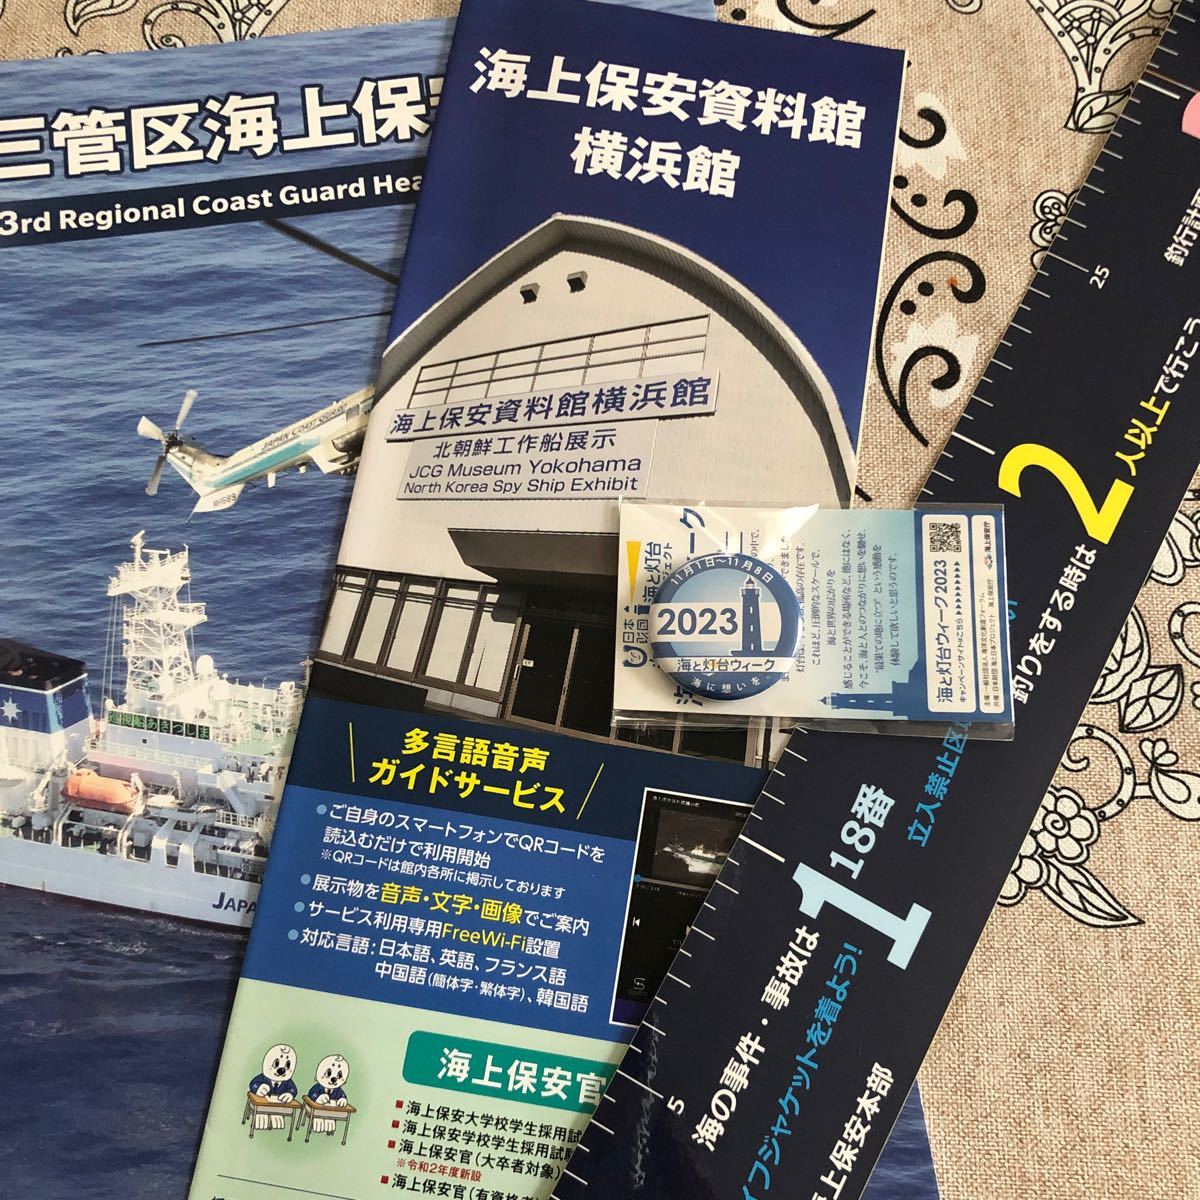  sea on security . pamphlet 